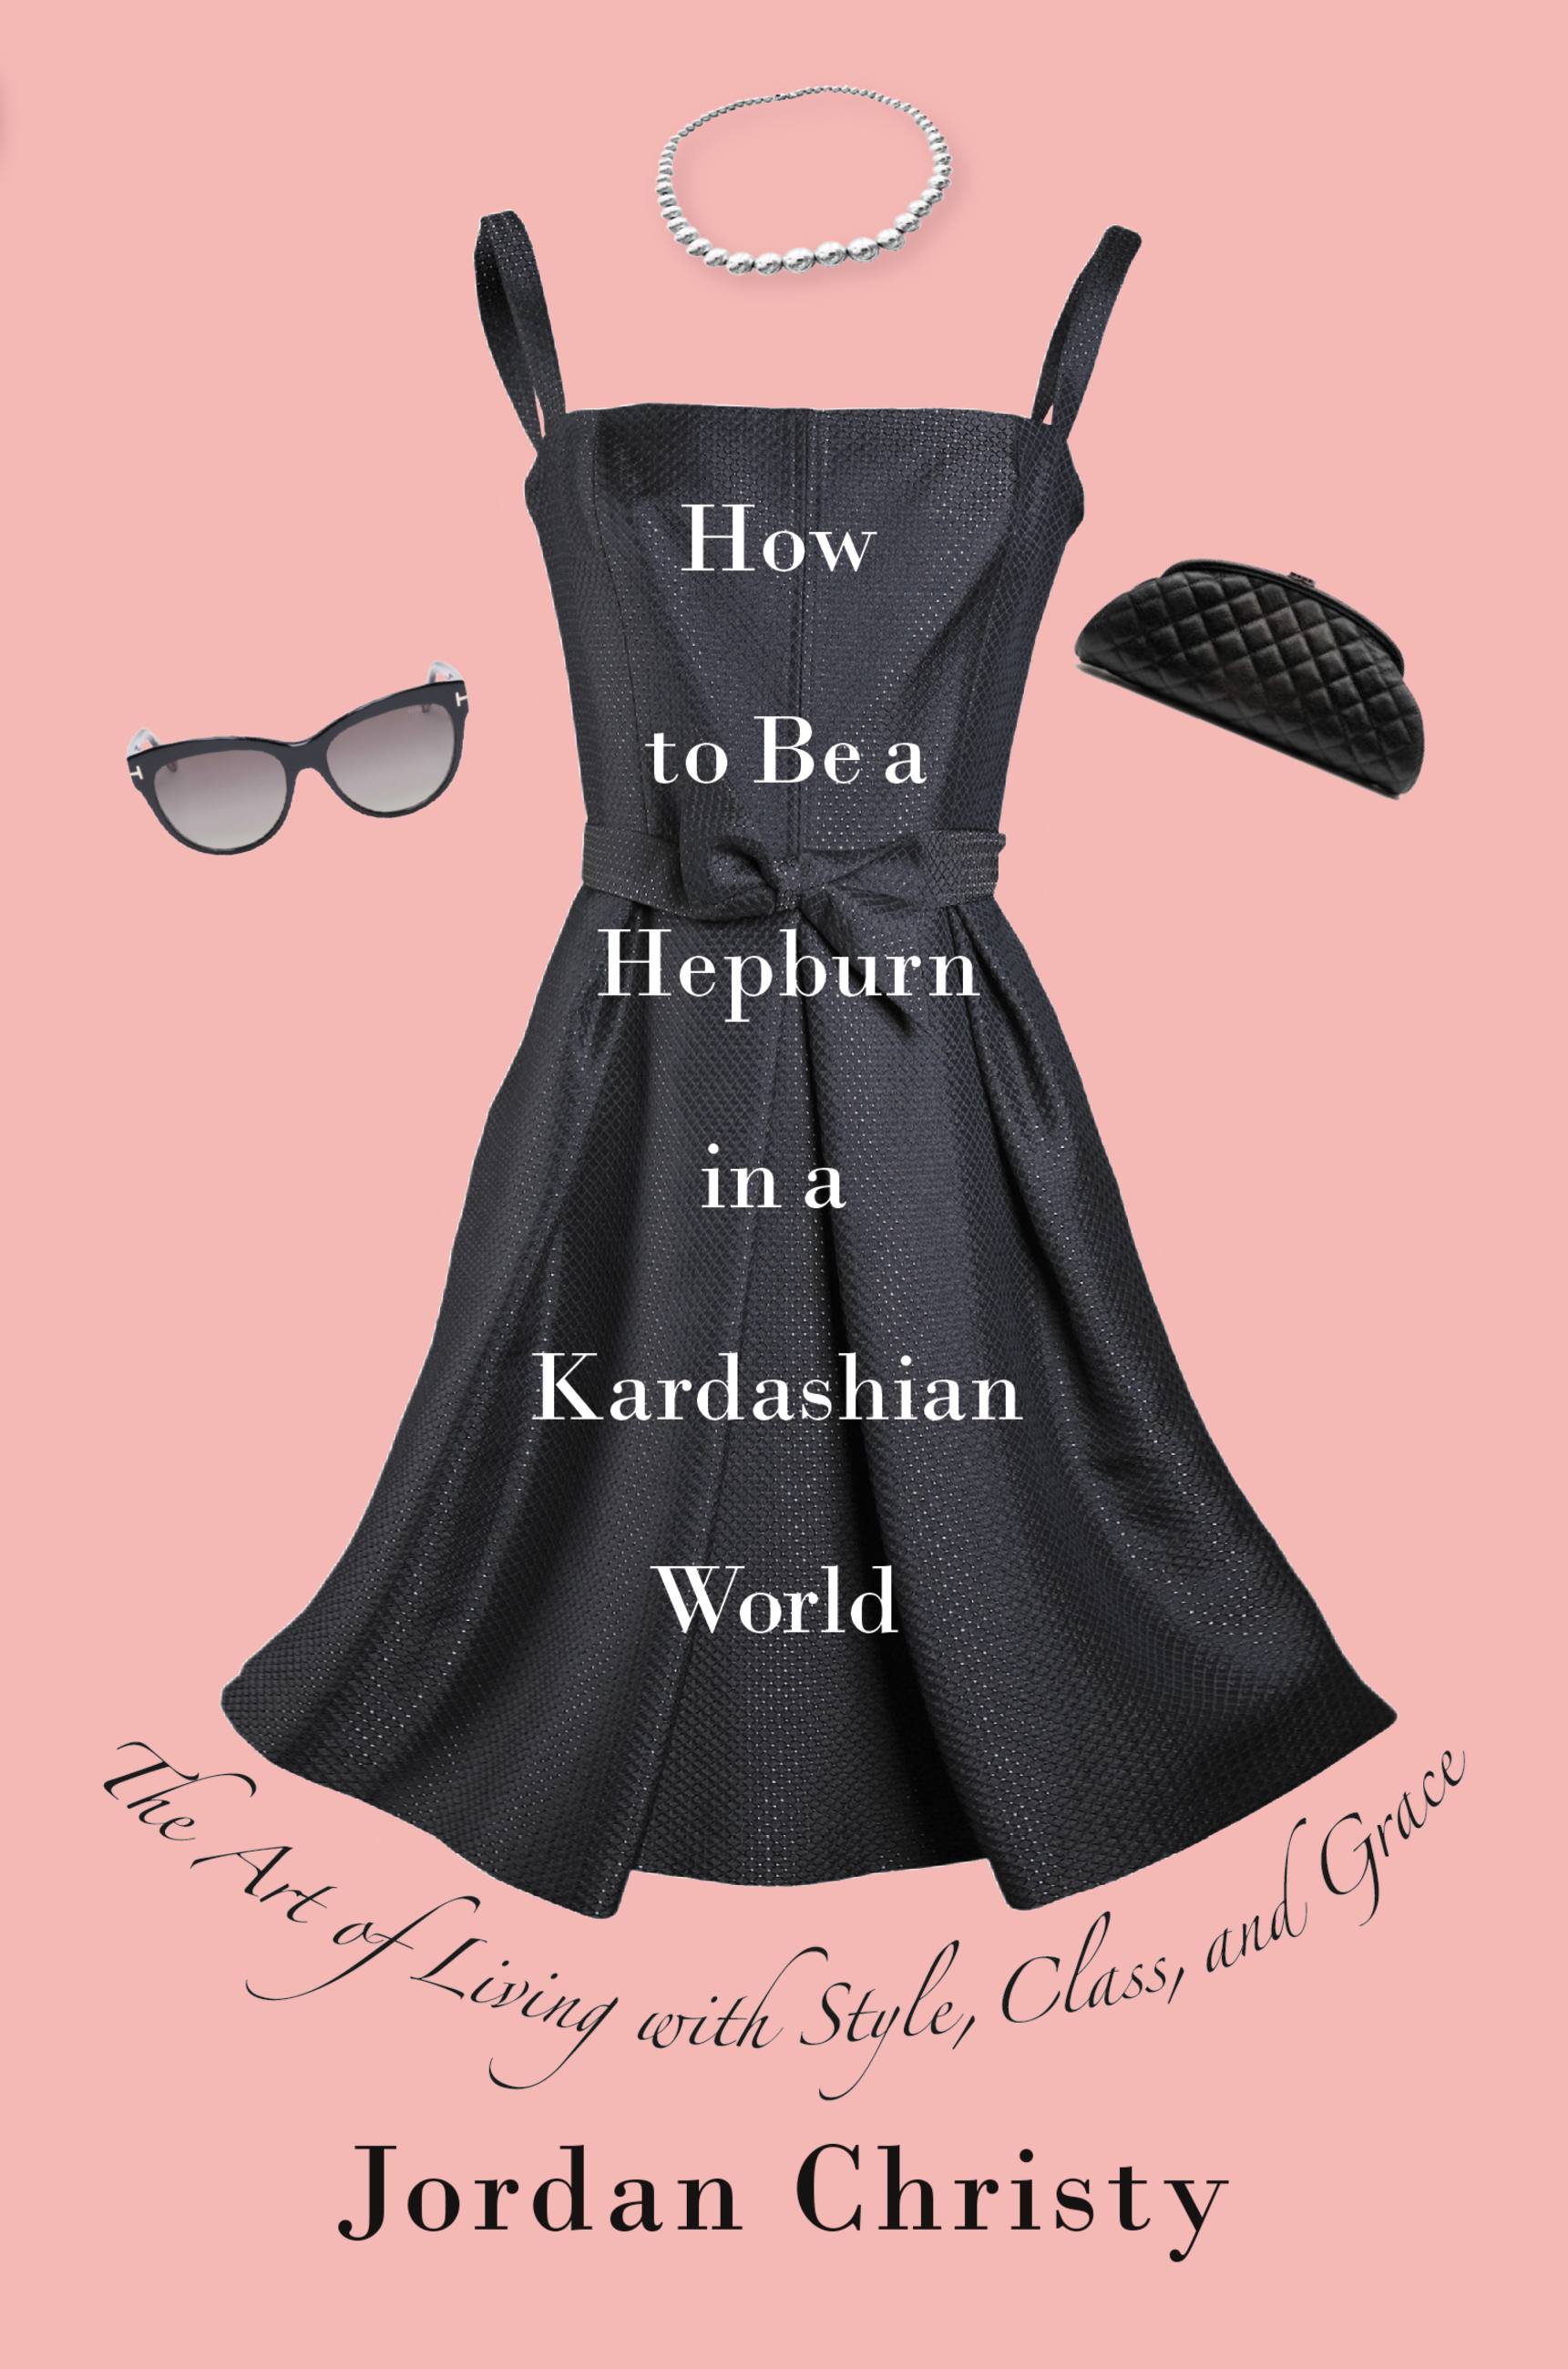 Umschlagbild für How to Be a Hepburn in a Kardashian World [electronic resource] : The Art of Living with Style, Class, and Grace